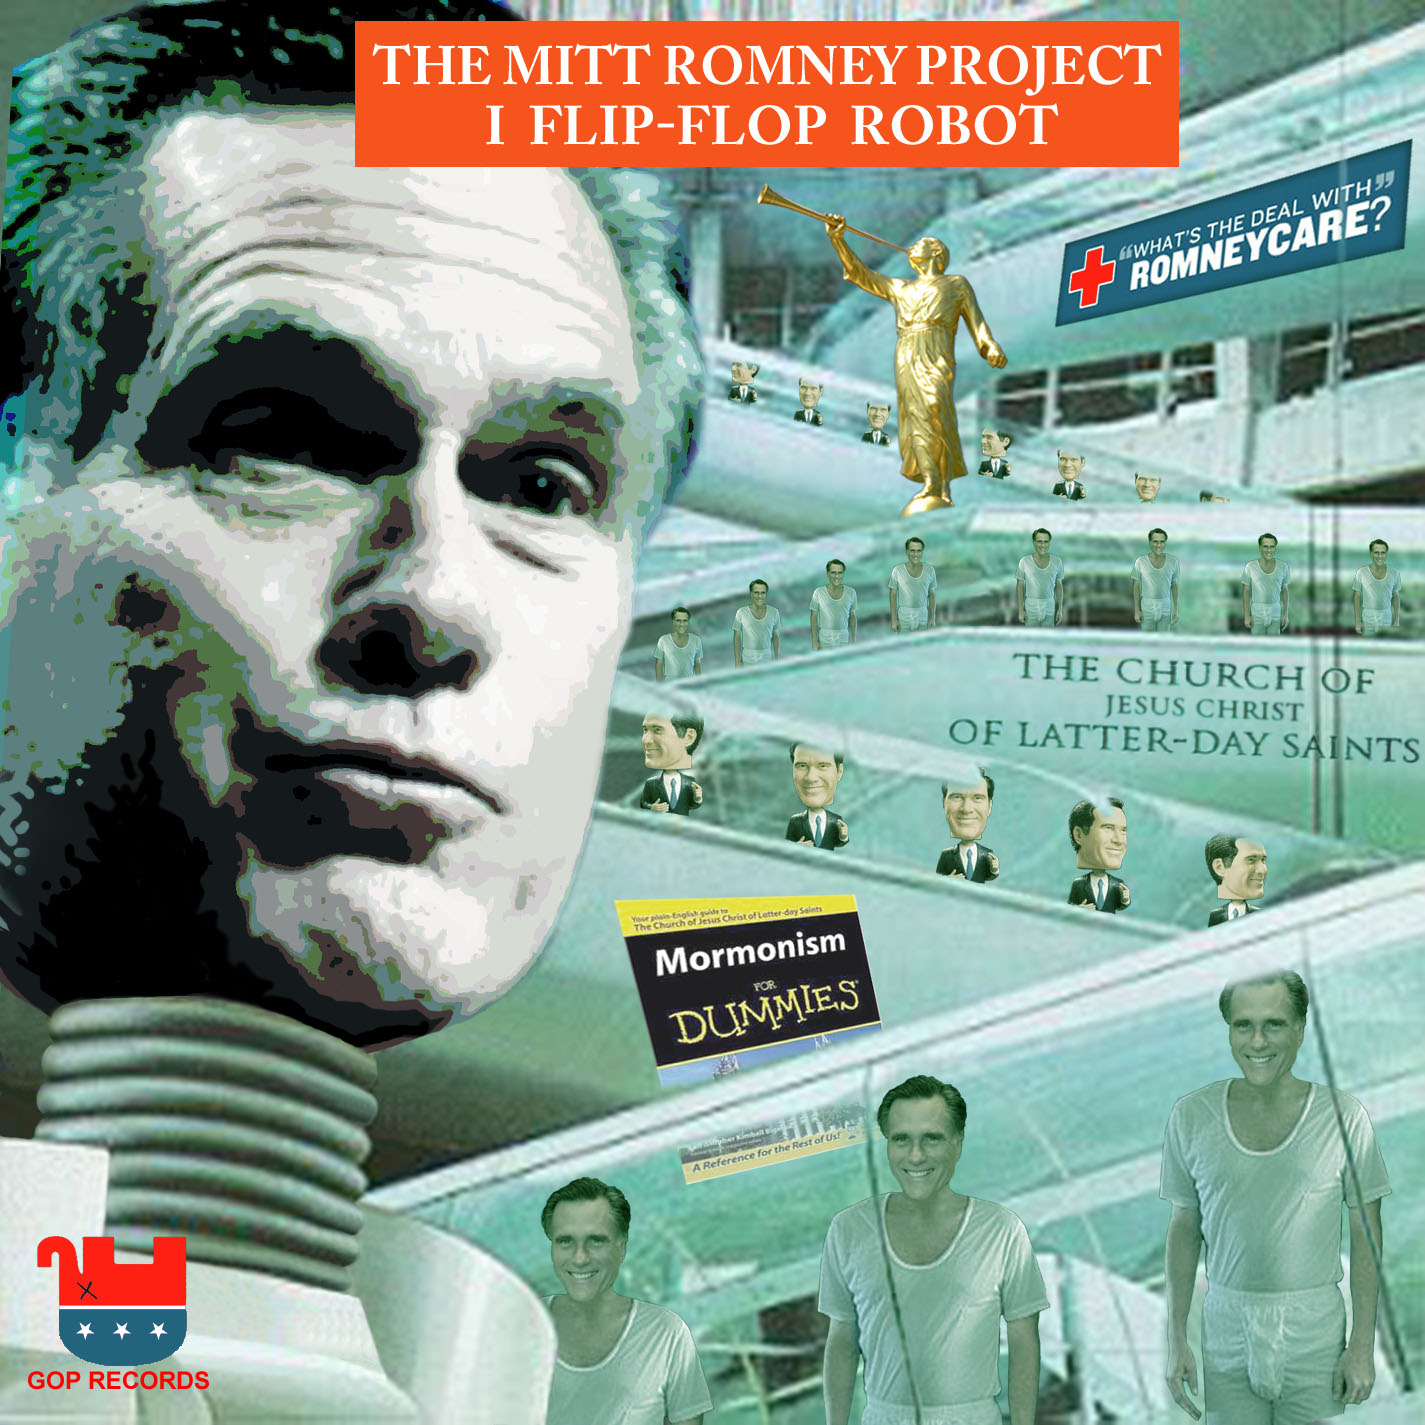 Album cover parody of I Robot by The Alan Parsons Project